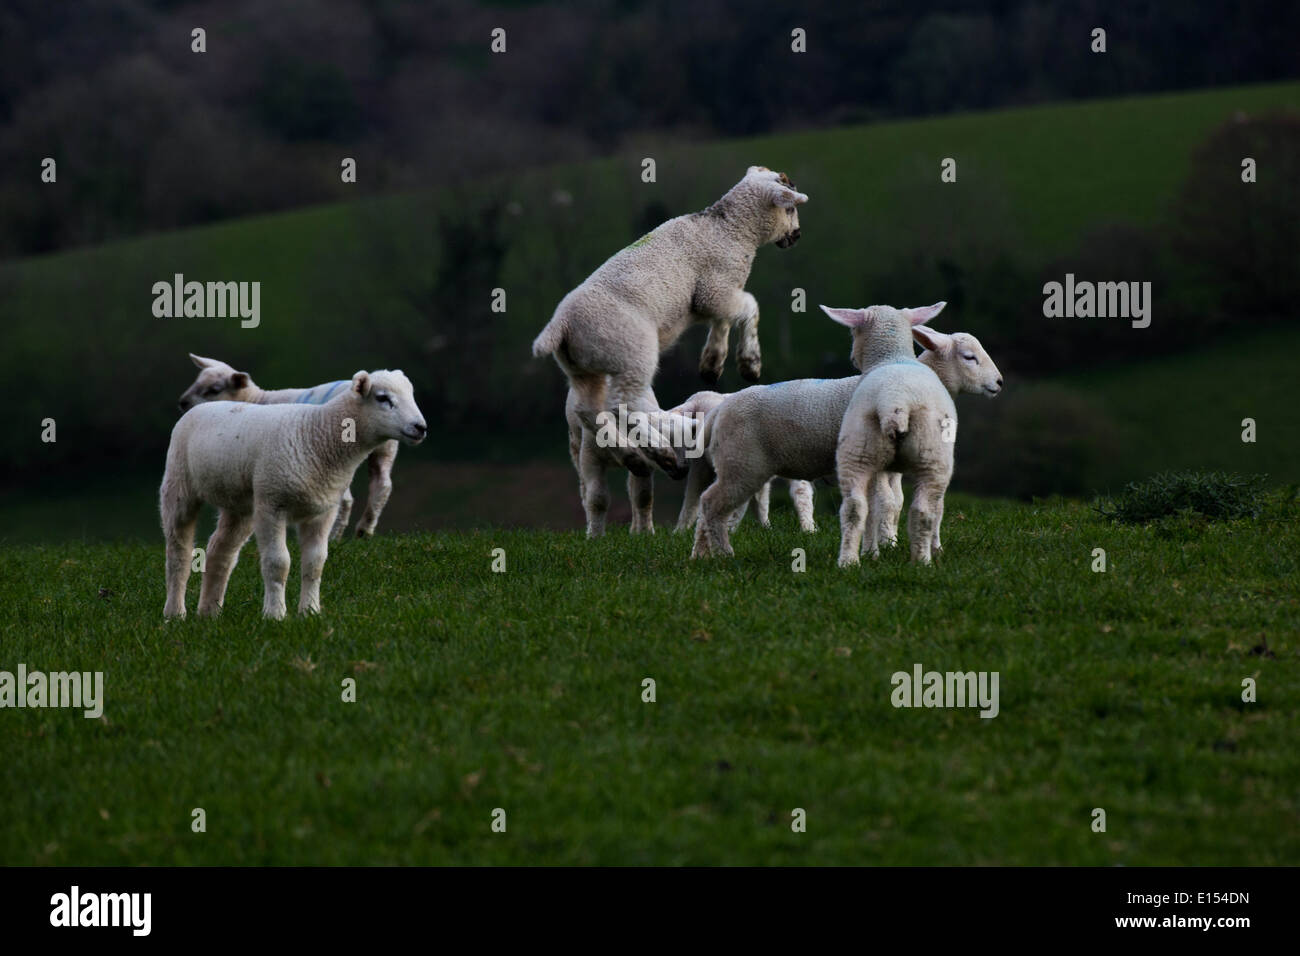 Lambs in a field with one jumping in the air Stock Photo